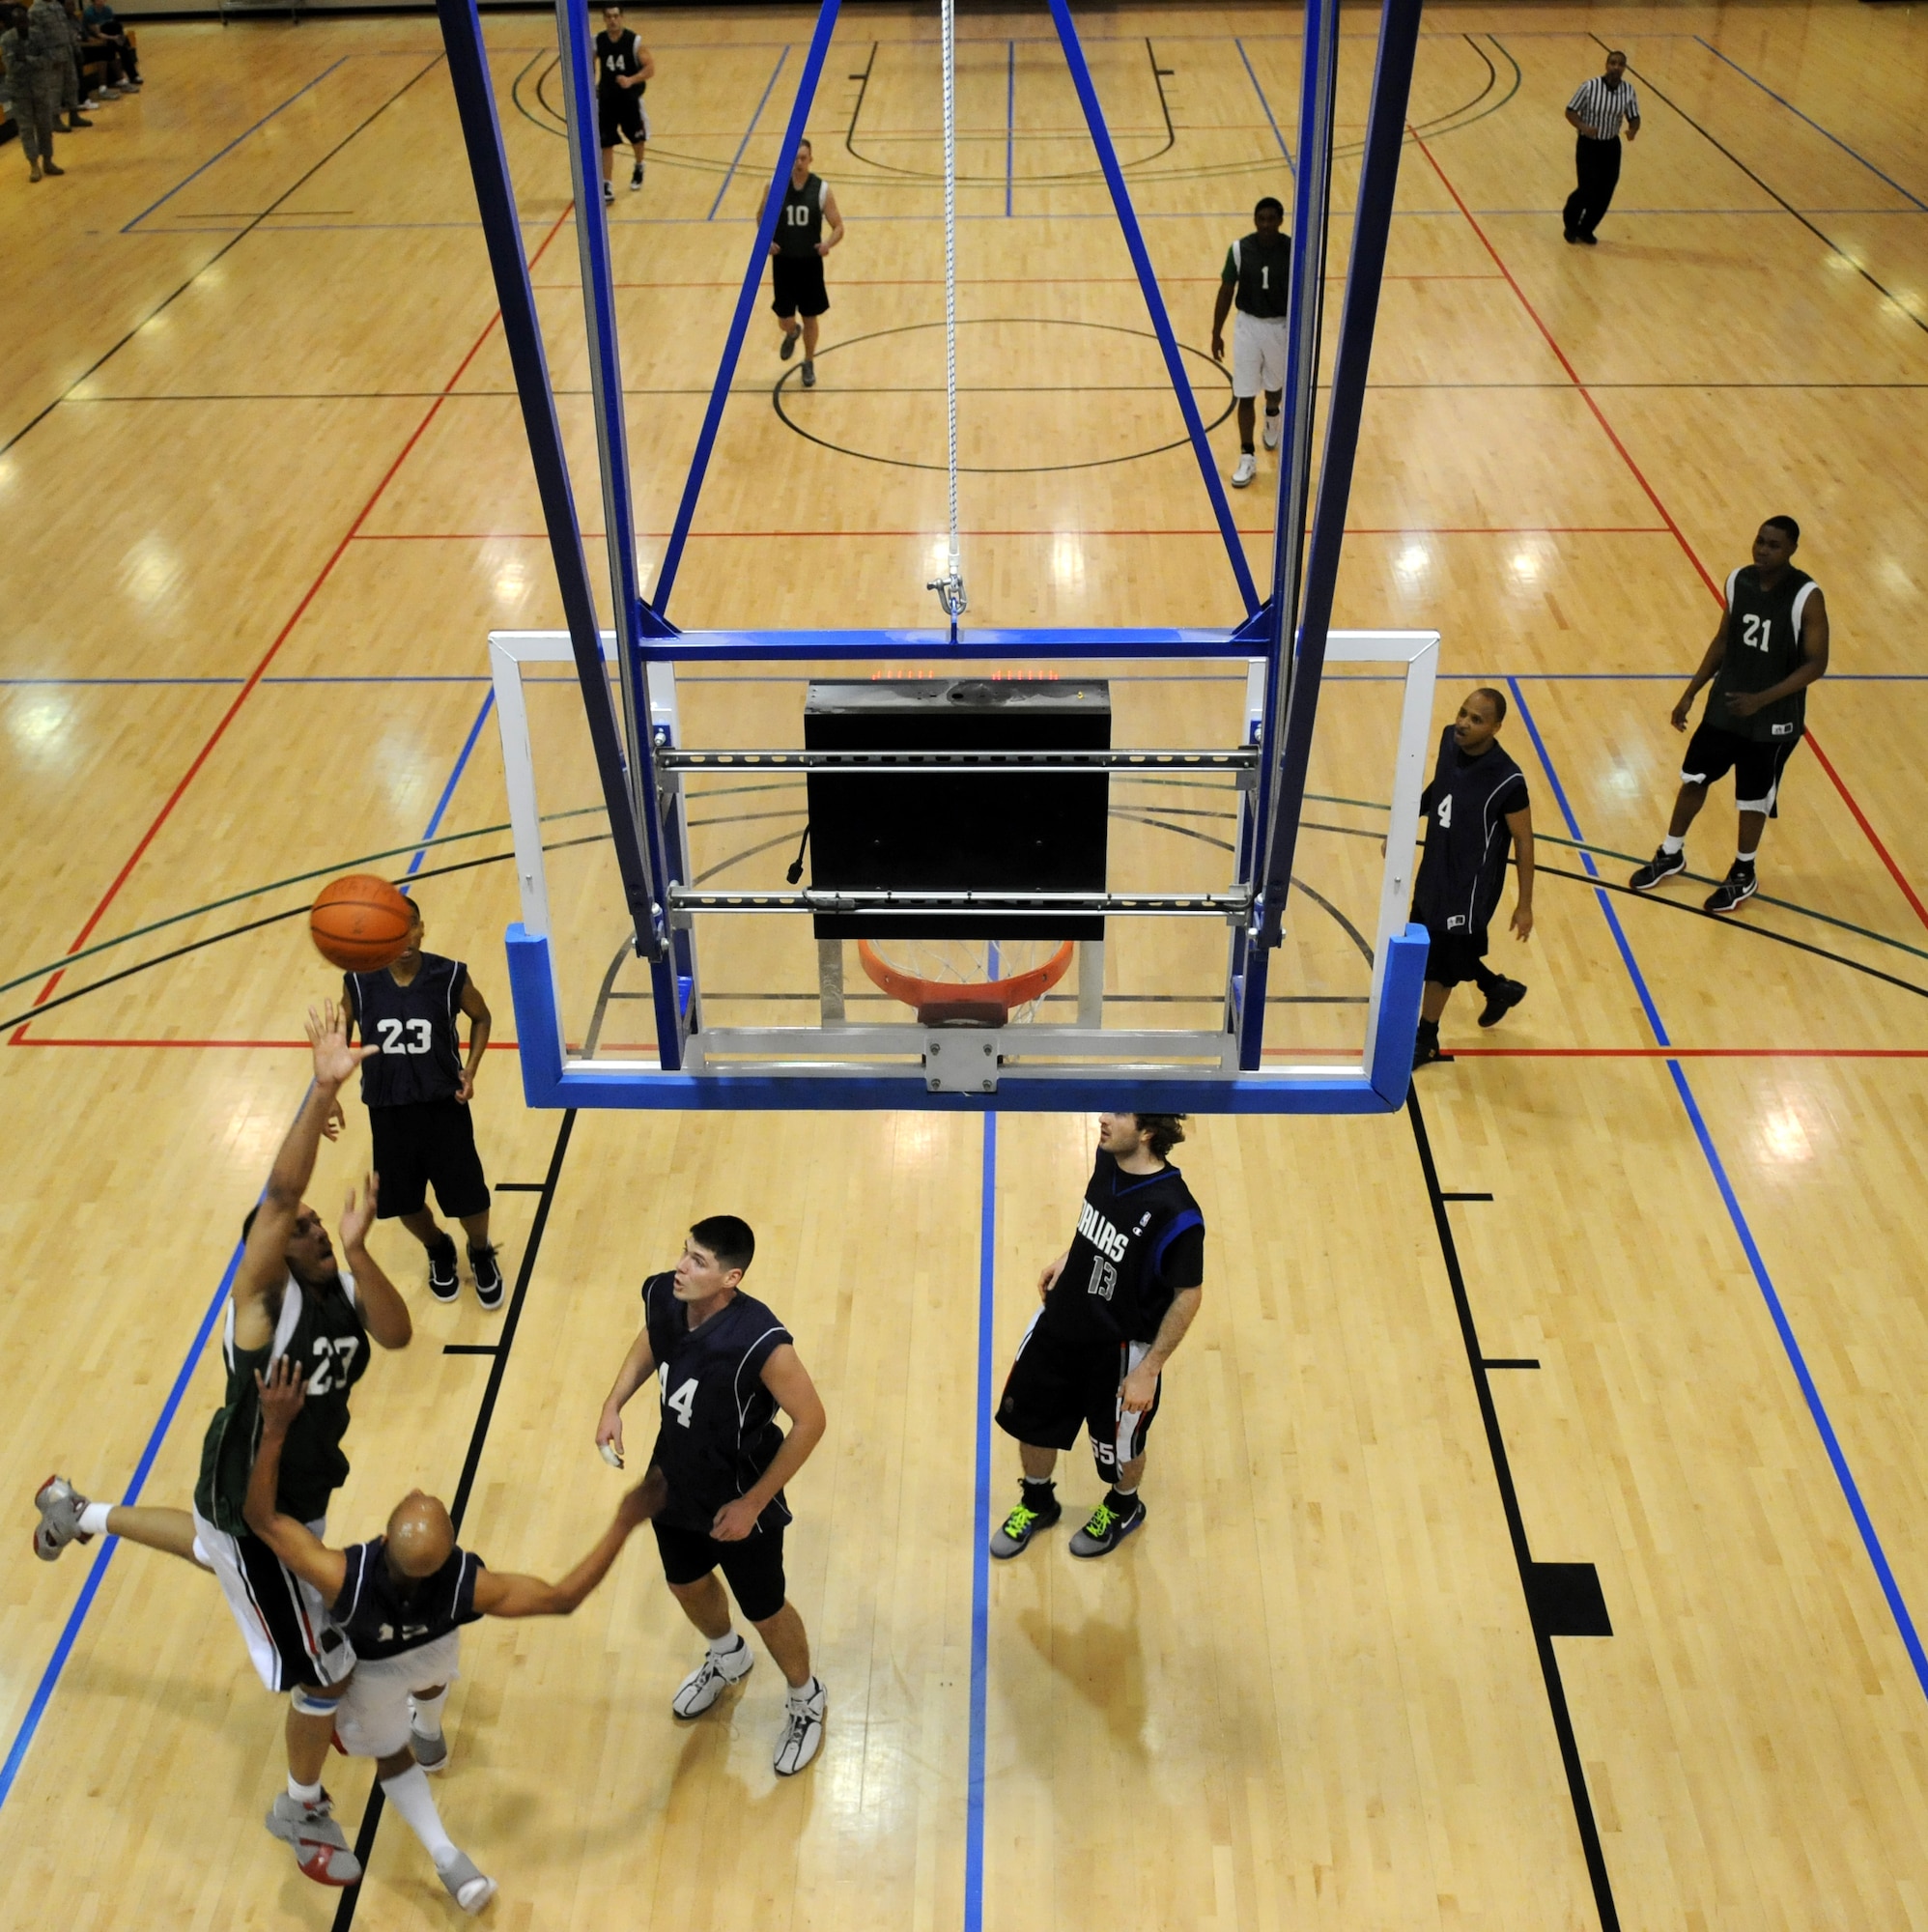 RAF MILDENHALL, England – Corey Fletcher, 100th Maintenance Group, attempts a shot after being fouled by Stacy Cochran, 488th Intelligence Squadron, after a fast break during the Intramural Basketball Championship game at the Hardstand Gym Feb. 18. (U.S. Air Force photo/ Staff Sgt. Jerry Fleshman)